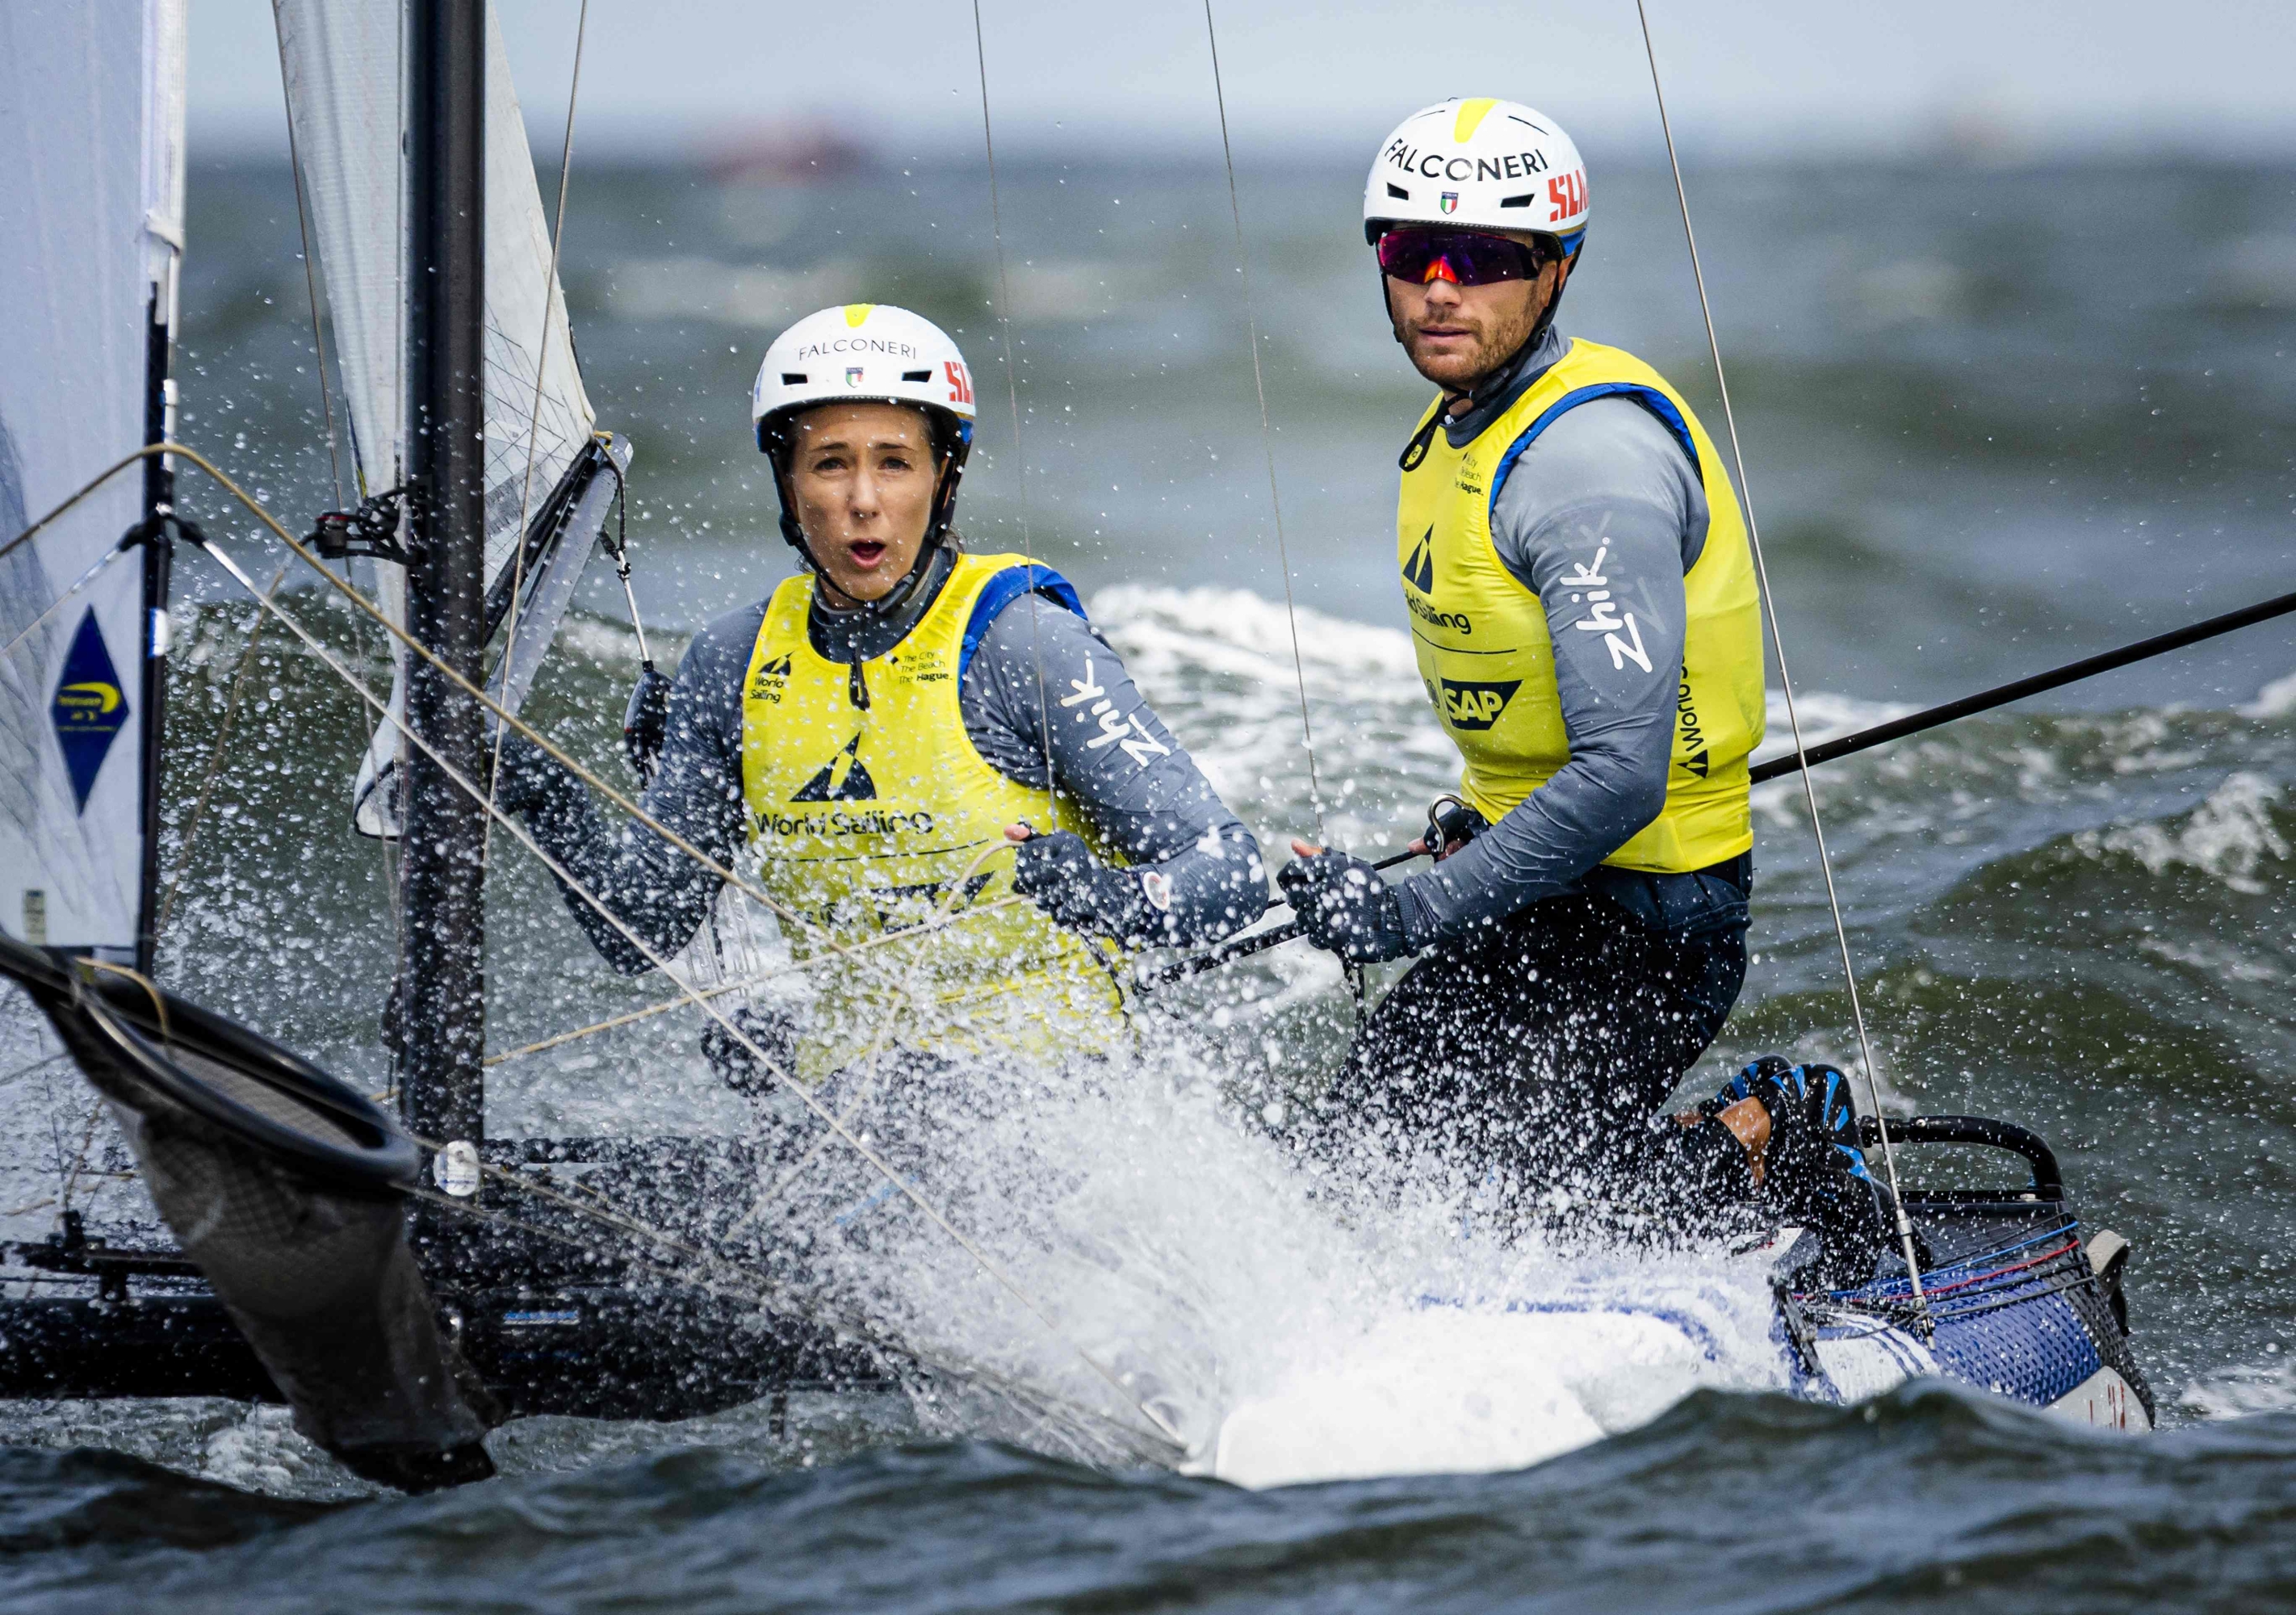 Caterina Banti and Ruggero Tita of Italy compete in Nacra 17 World Championship in Scheveningen, The Hague, on August 17, 2023. (Photo by Sem van der Wal / ANP / AFP) / Netherlands OUT